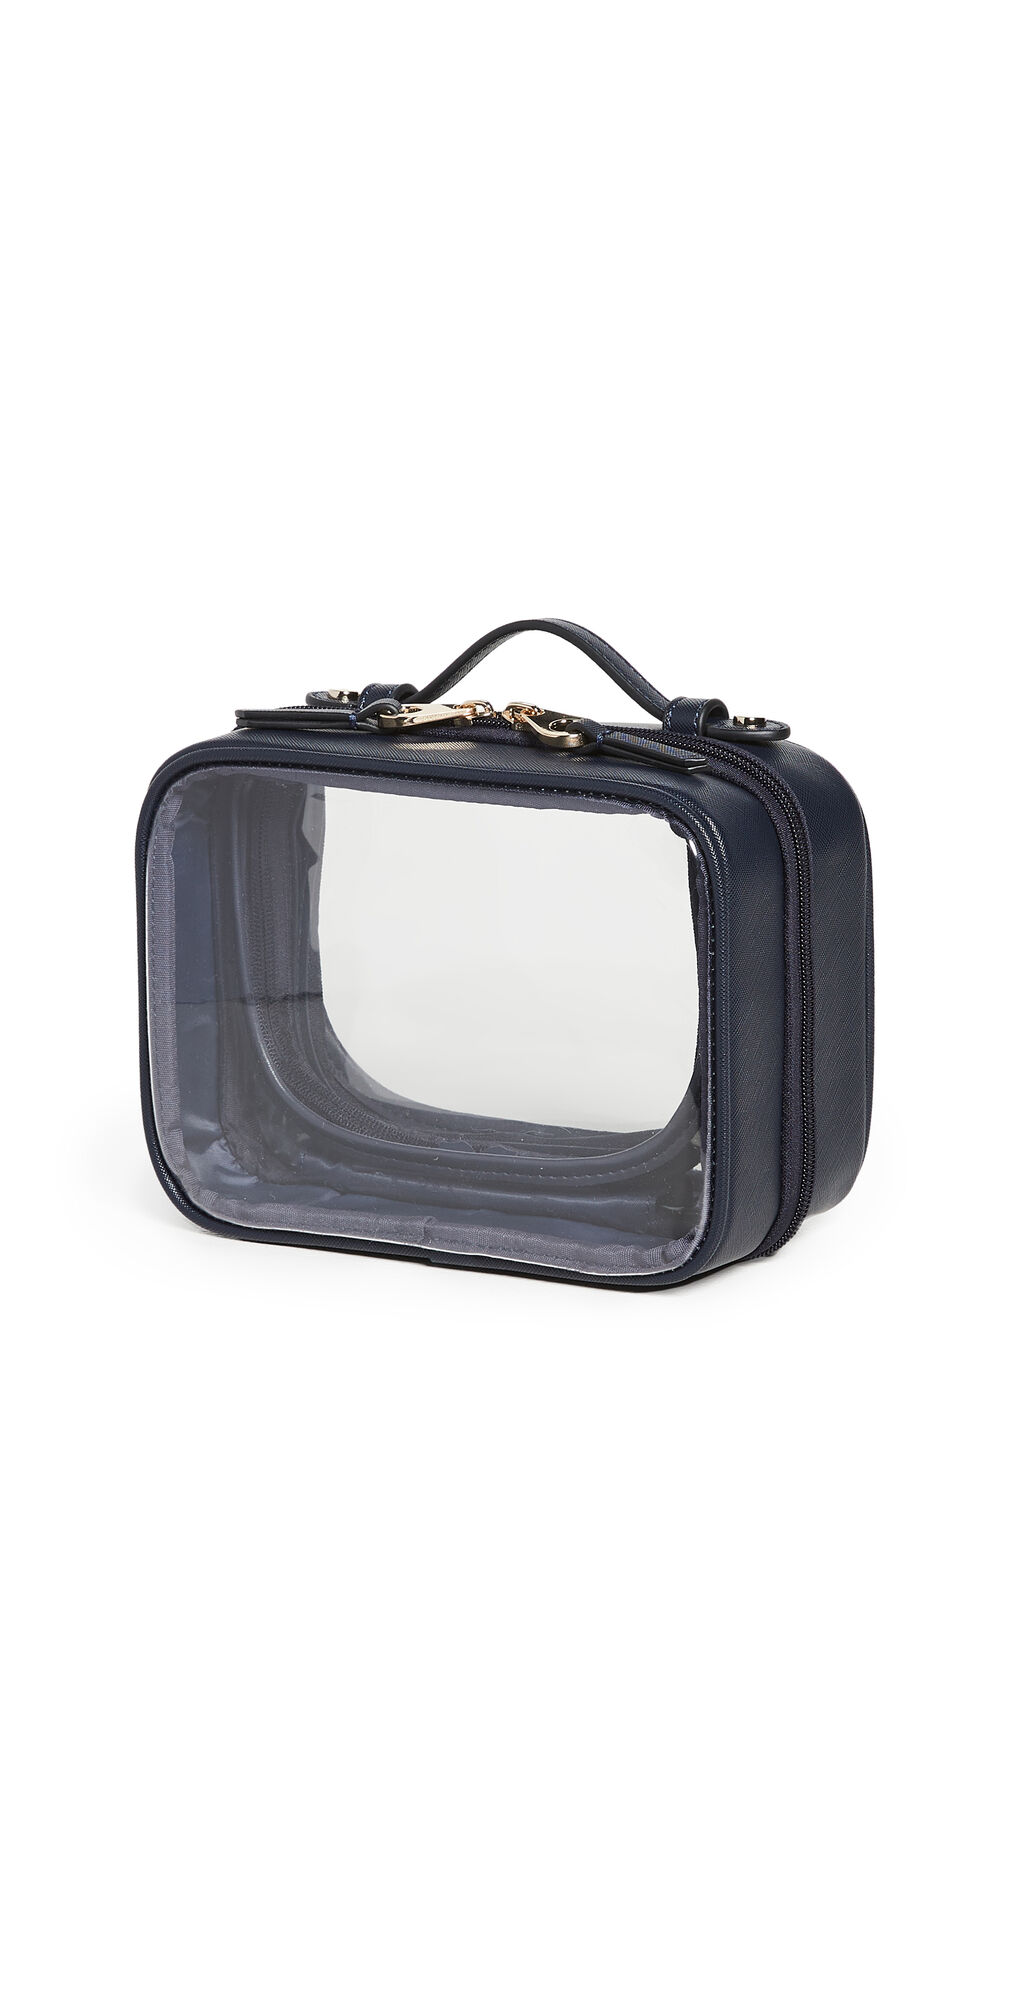 CALPAK Mini Clear Cosmetic Case Navy One Size  Navy  size:One Size